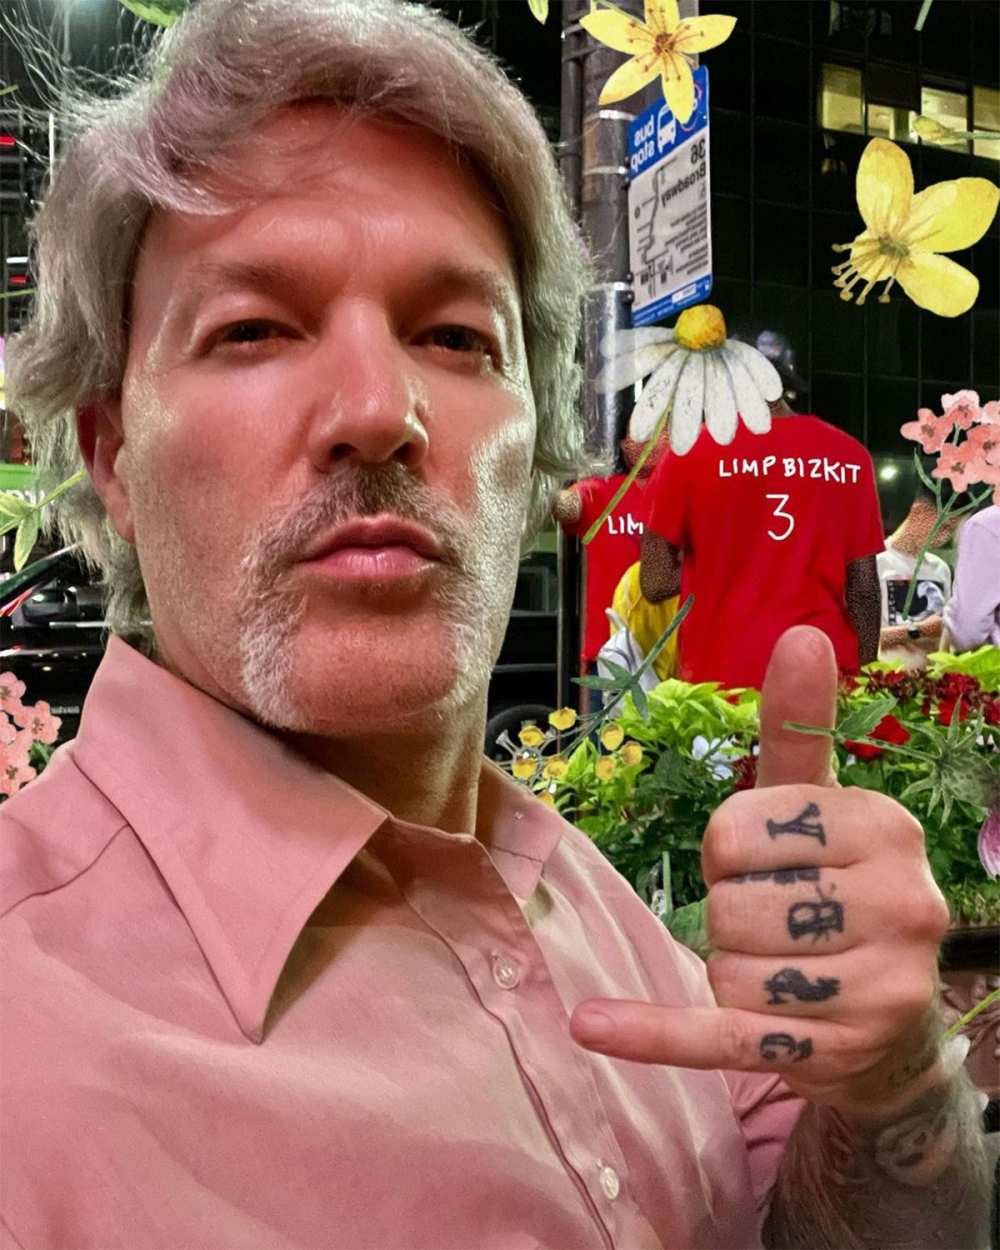 Limp Bizkit Fred Durst Is Nearly Unrecognizable With Mustache in New Selfie 2